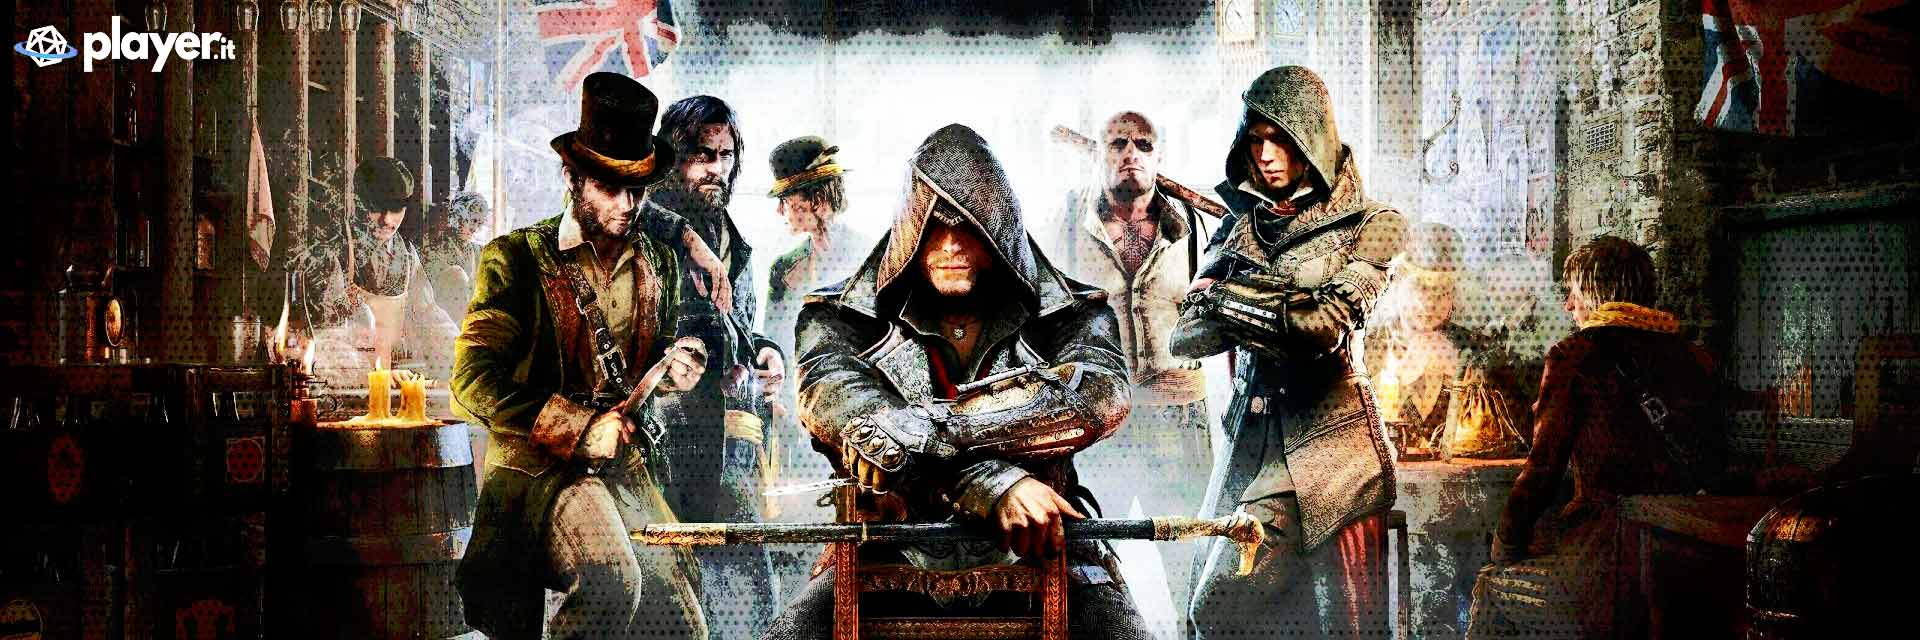 Assassin's Creed: Syndicate wallpaper in HD